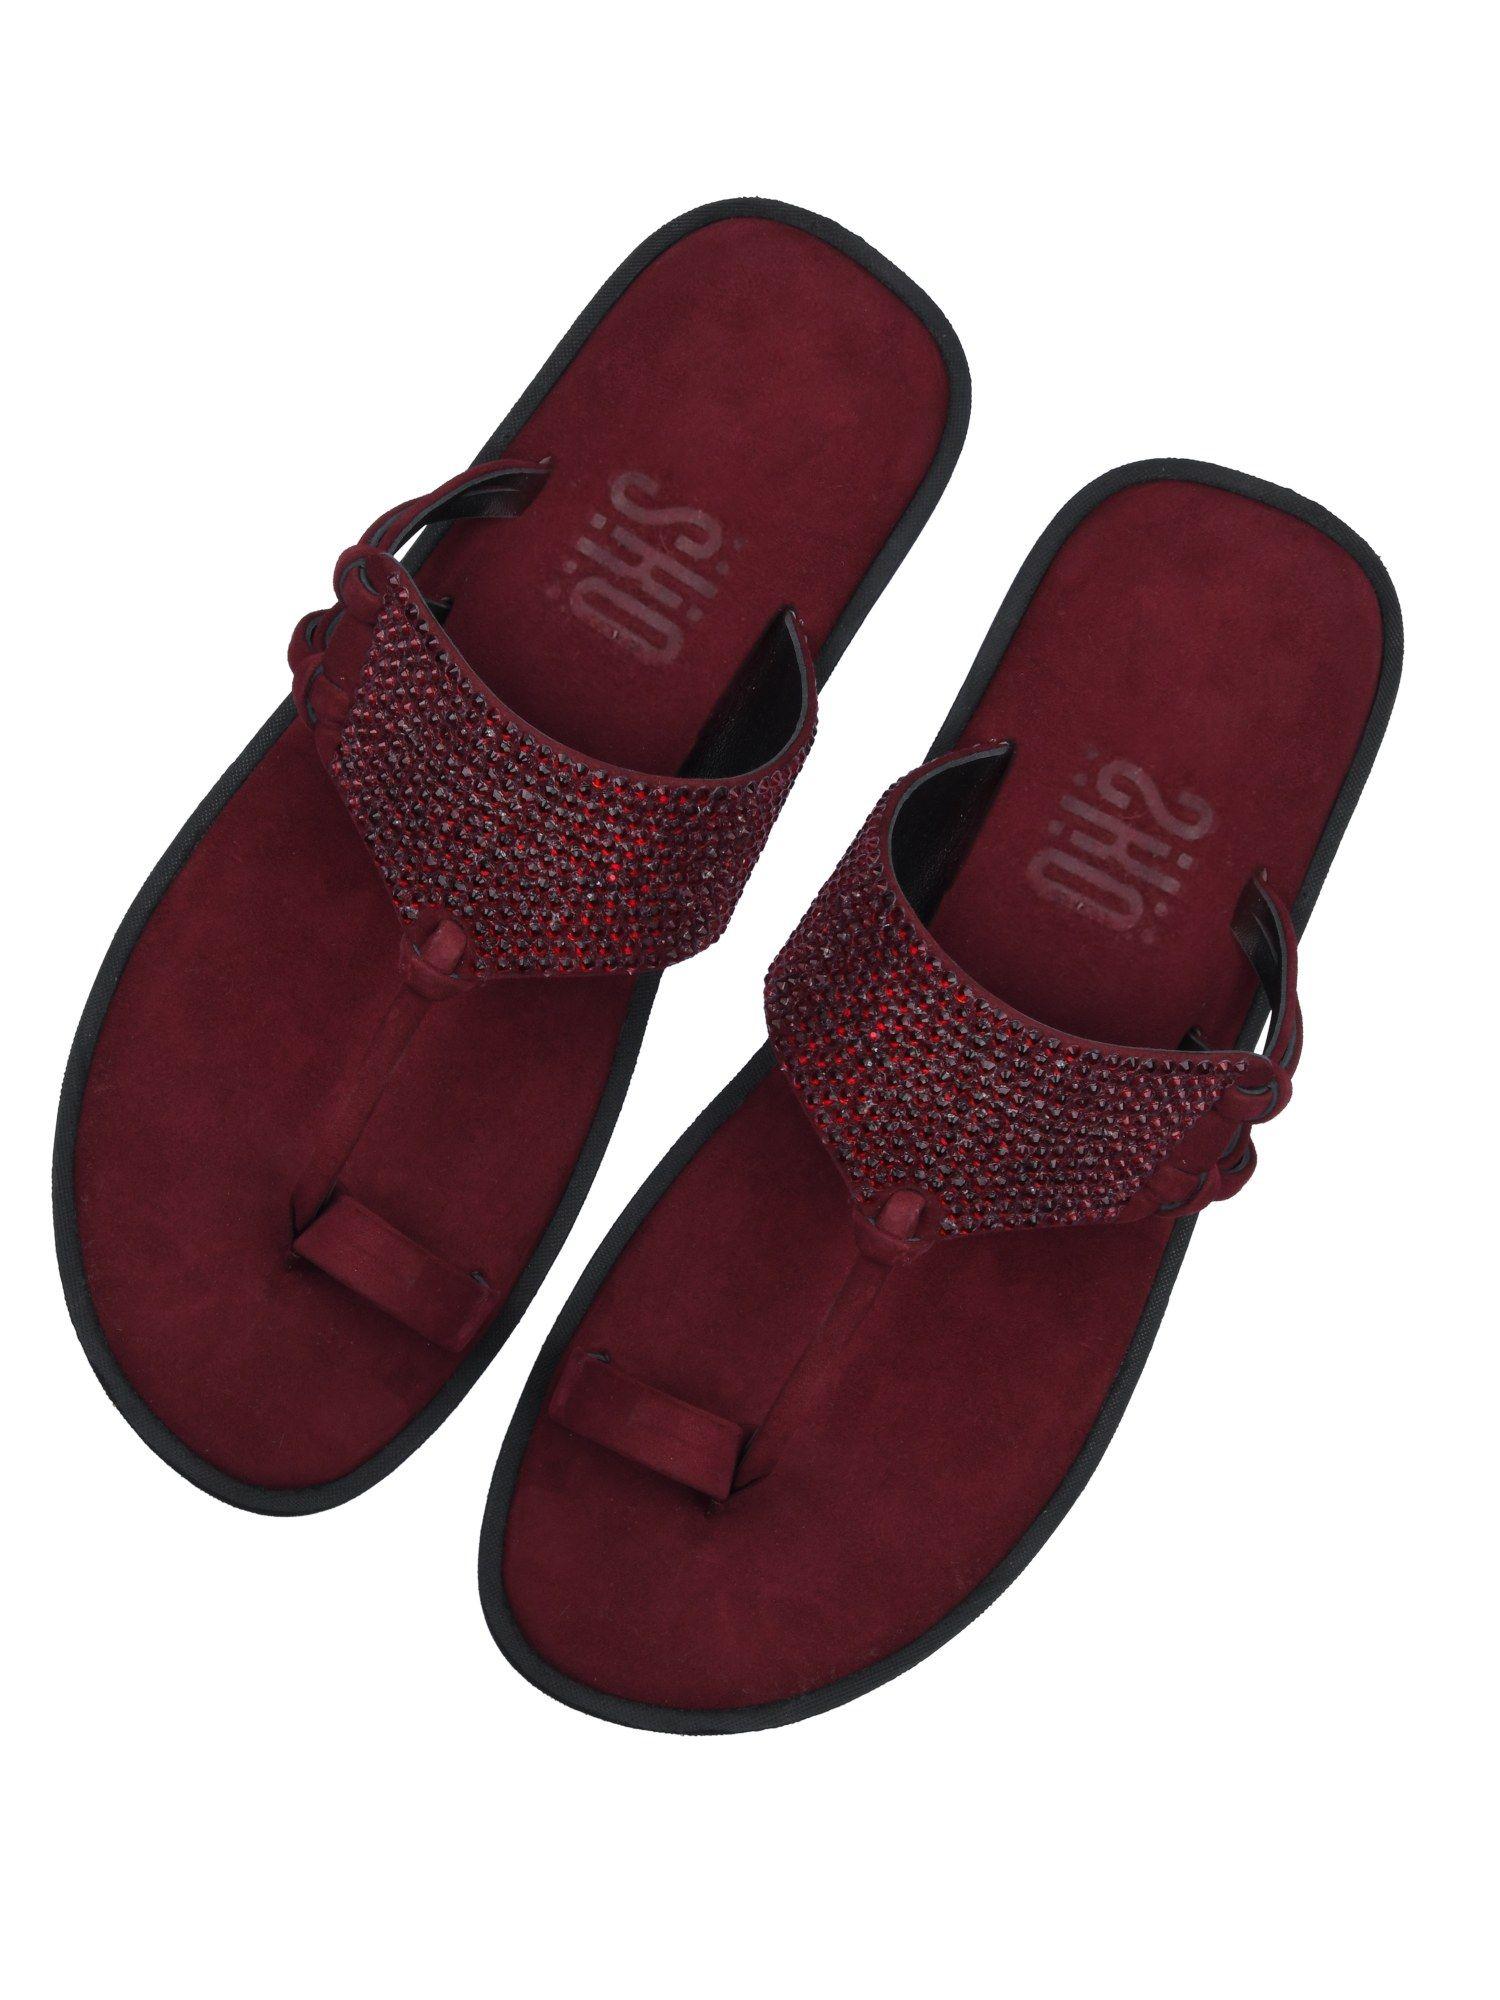 mens indy crystal maroon leather sandals